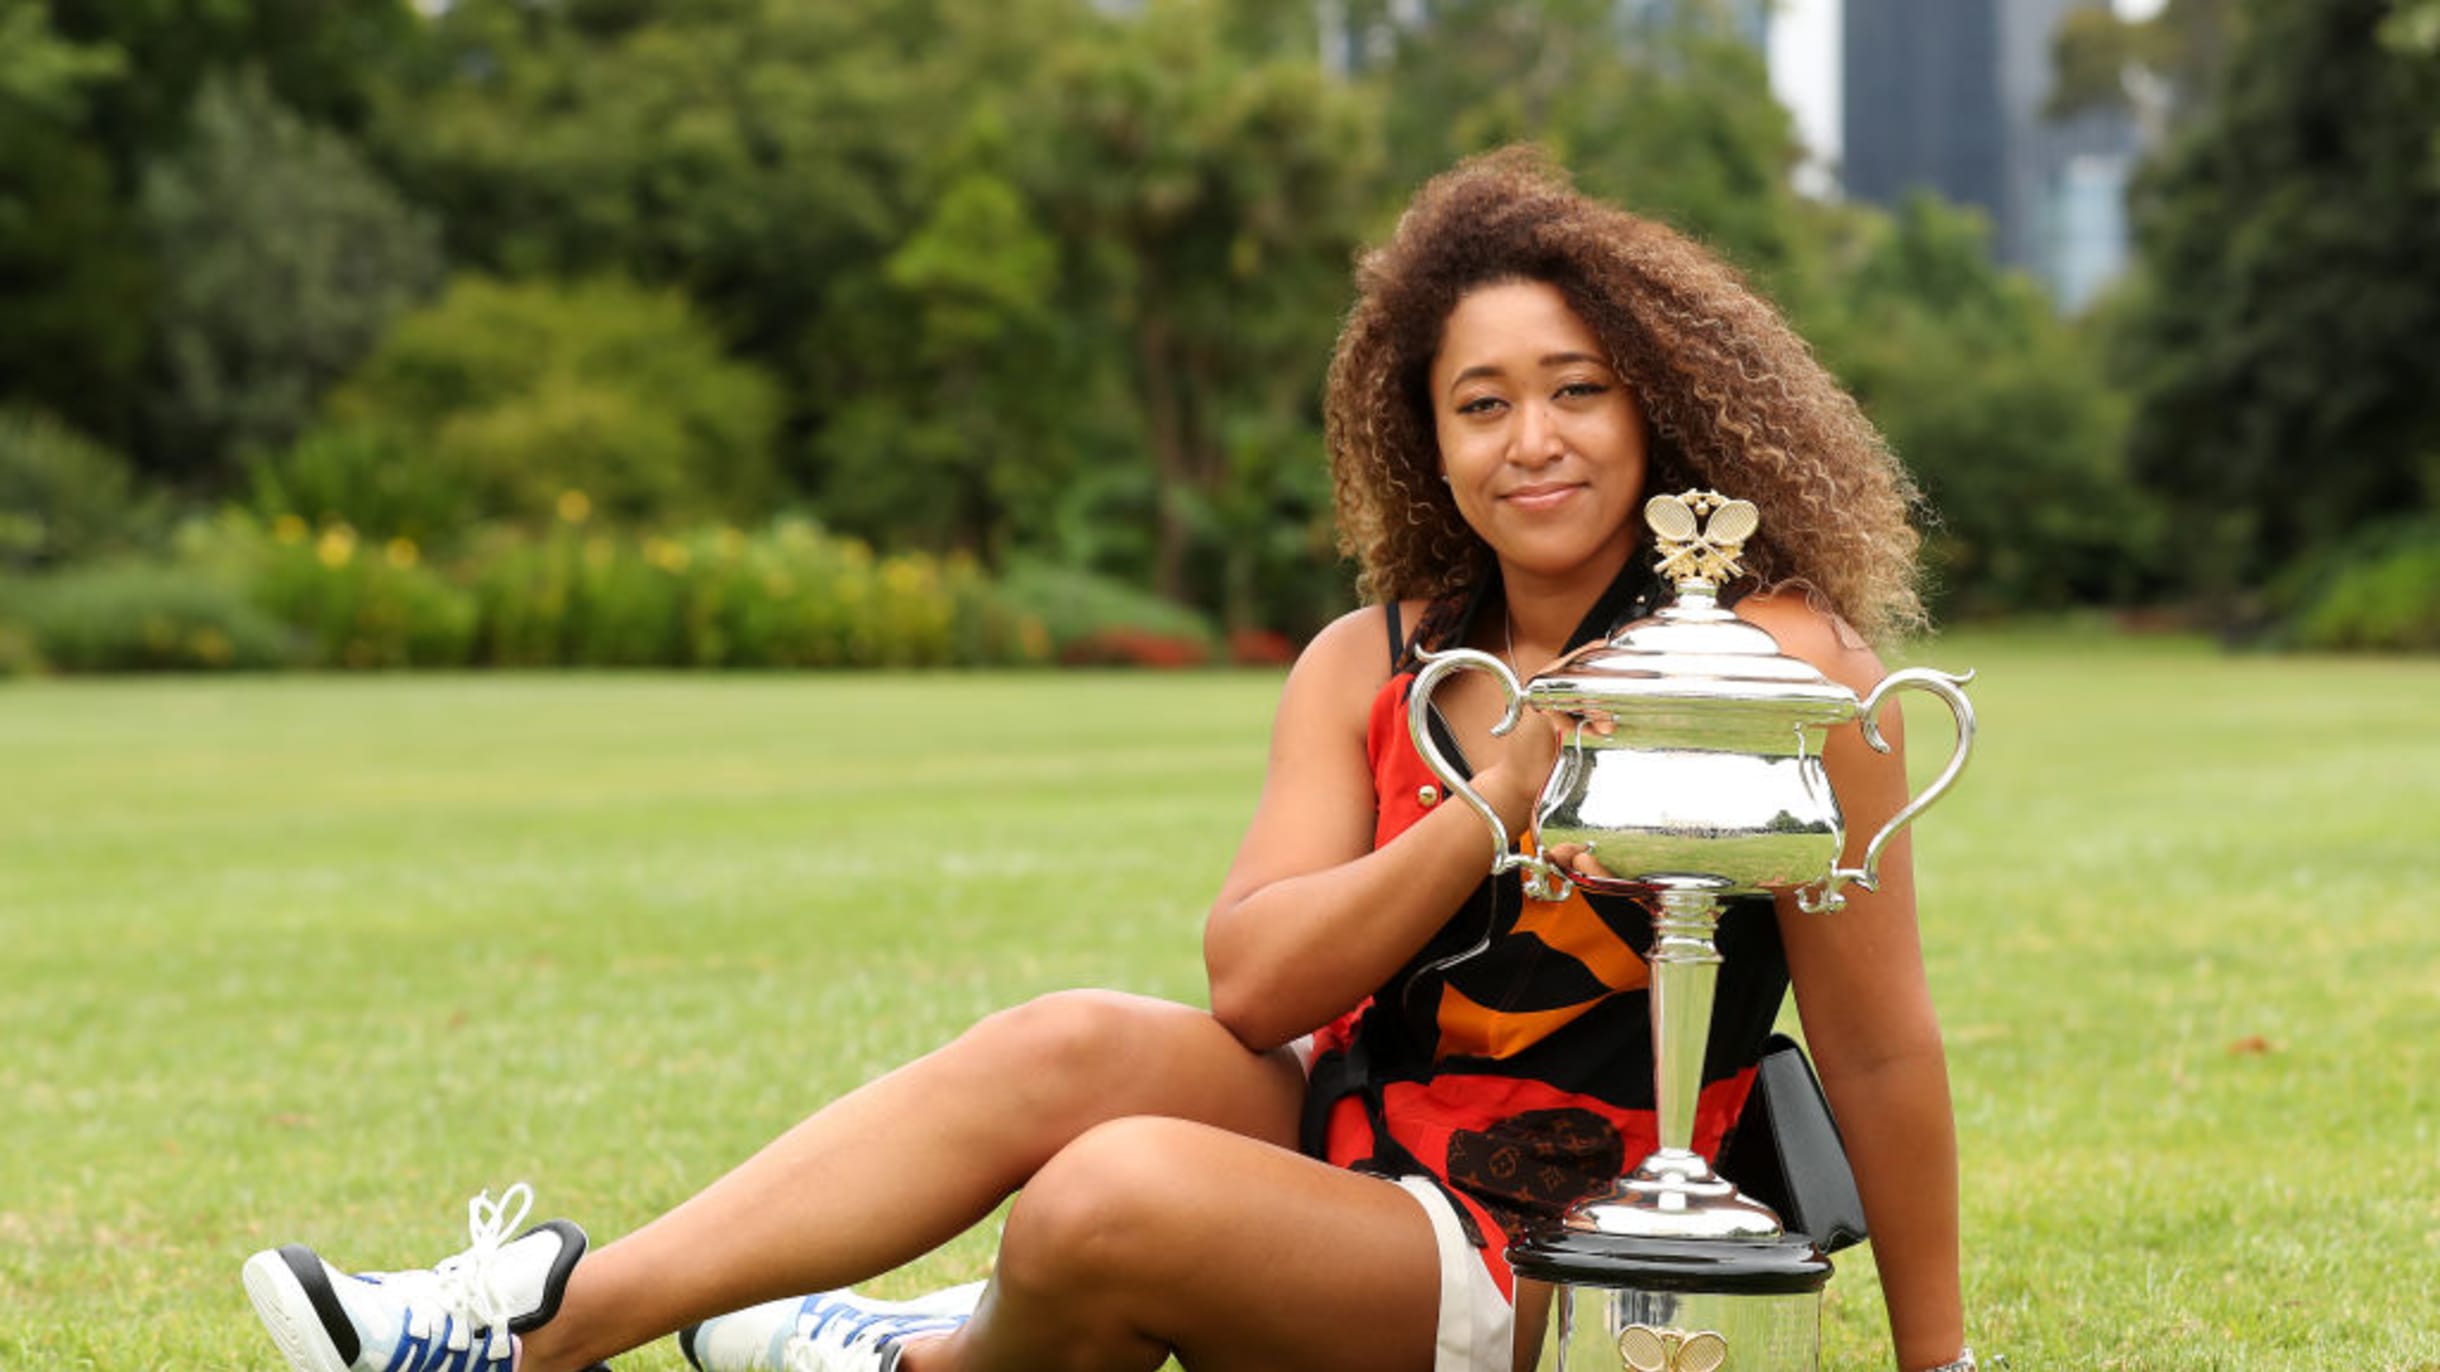 Former world No.1 and new mom Naomi Osaka returns to tennis court for star battle with Rui Hachimura